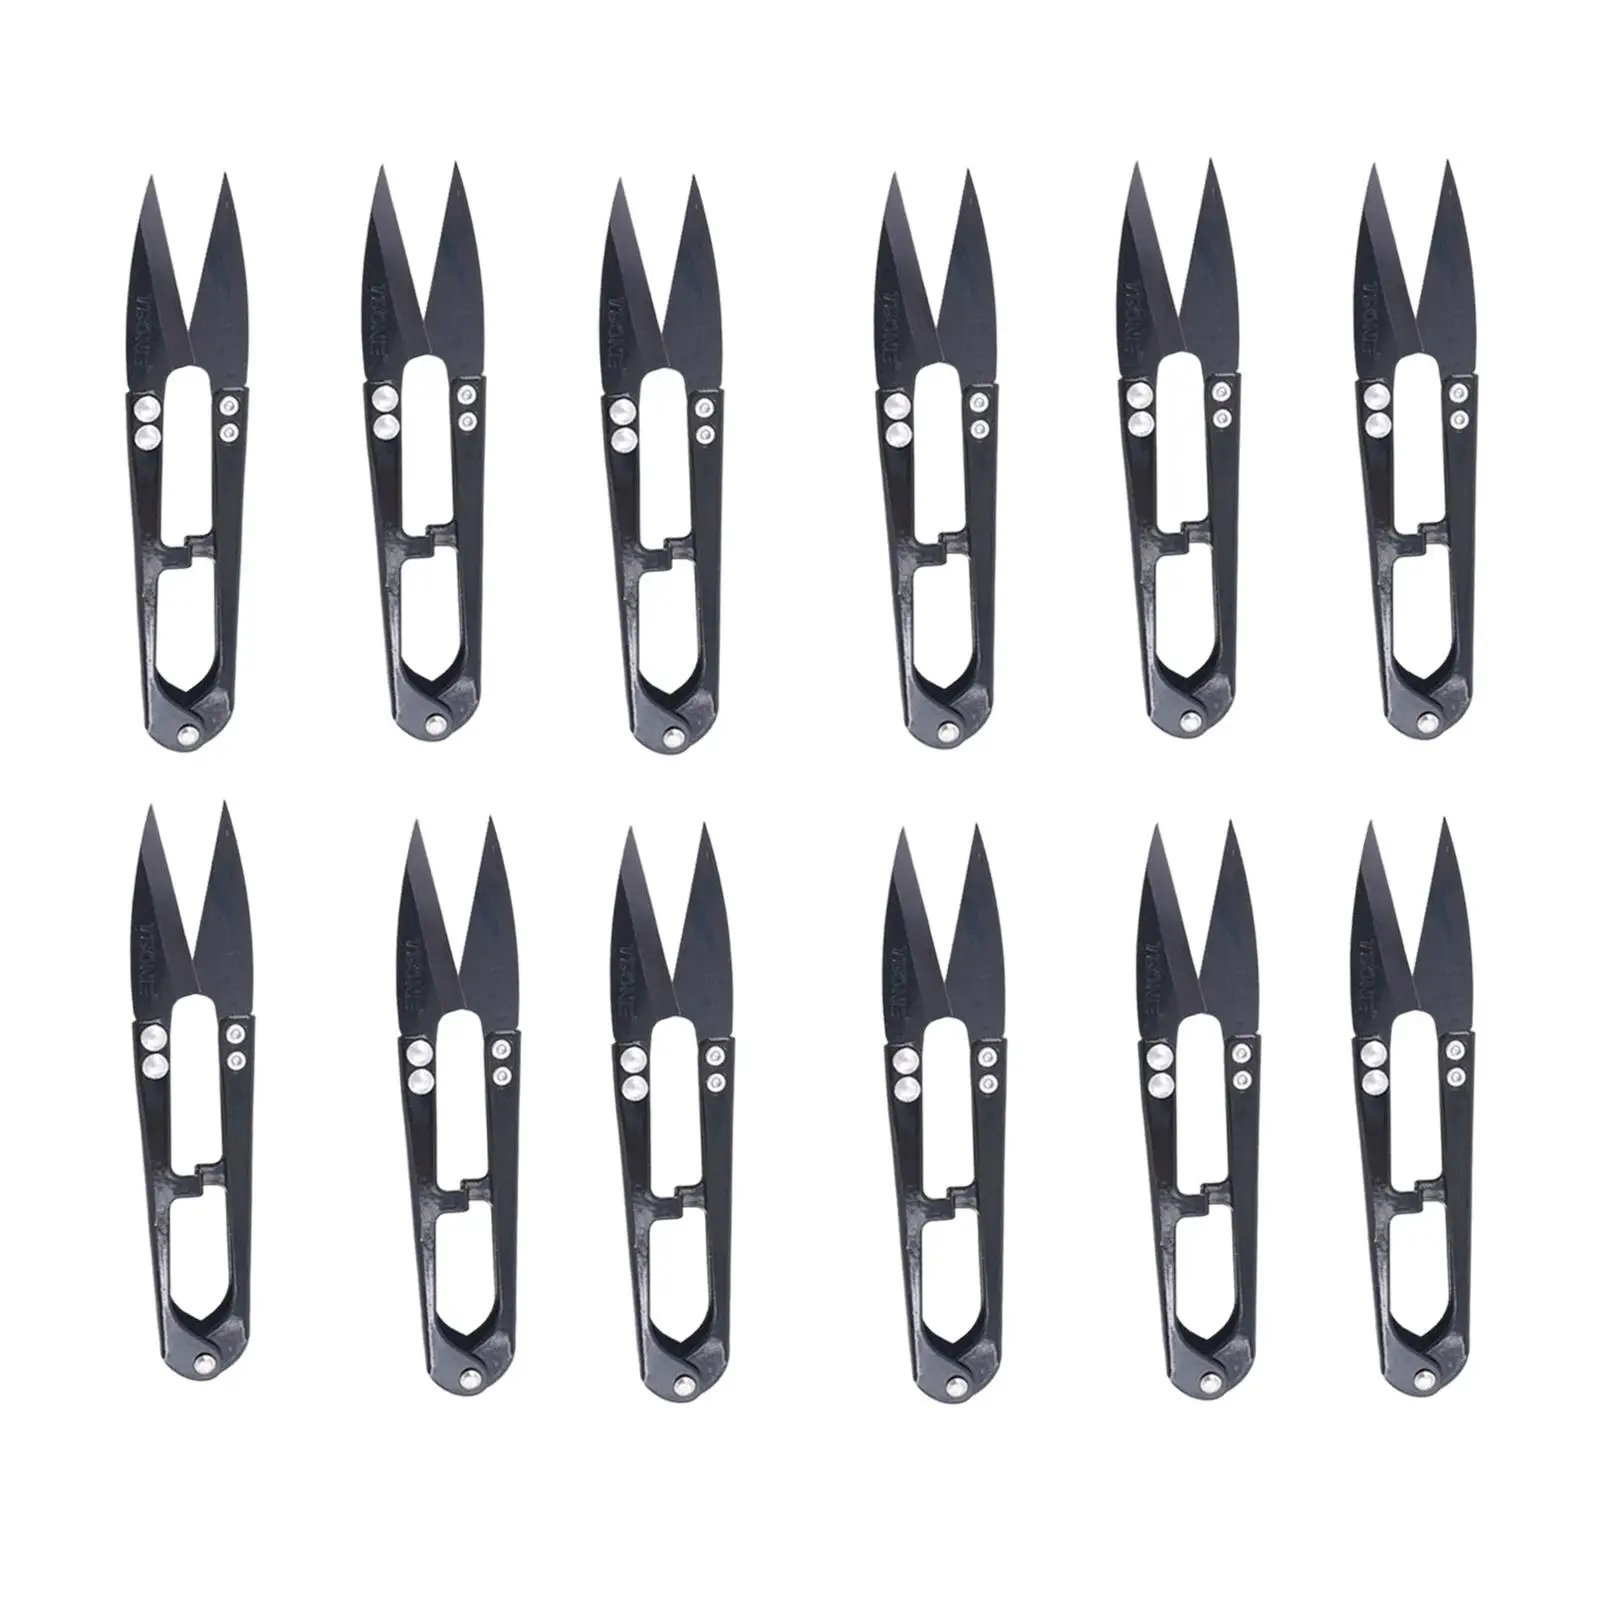 12 Pieces Portable Sewing Scissors for Fabric Embroidery Beading Thread Cutter Trimming  for 